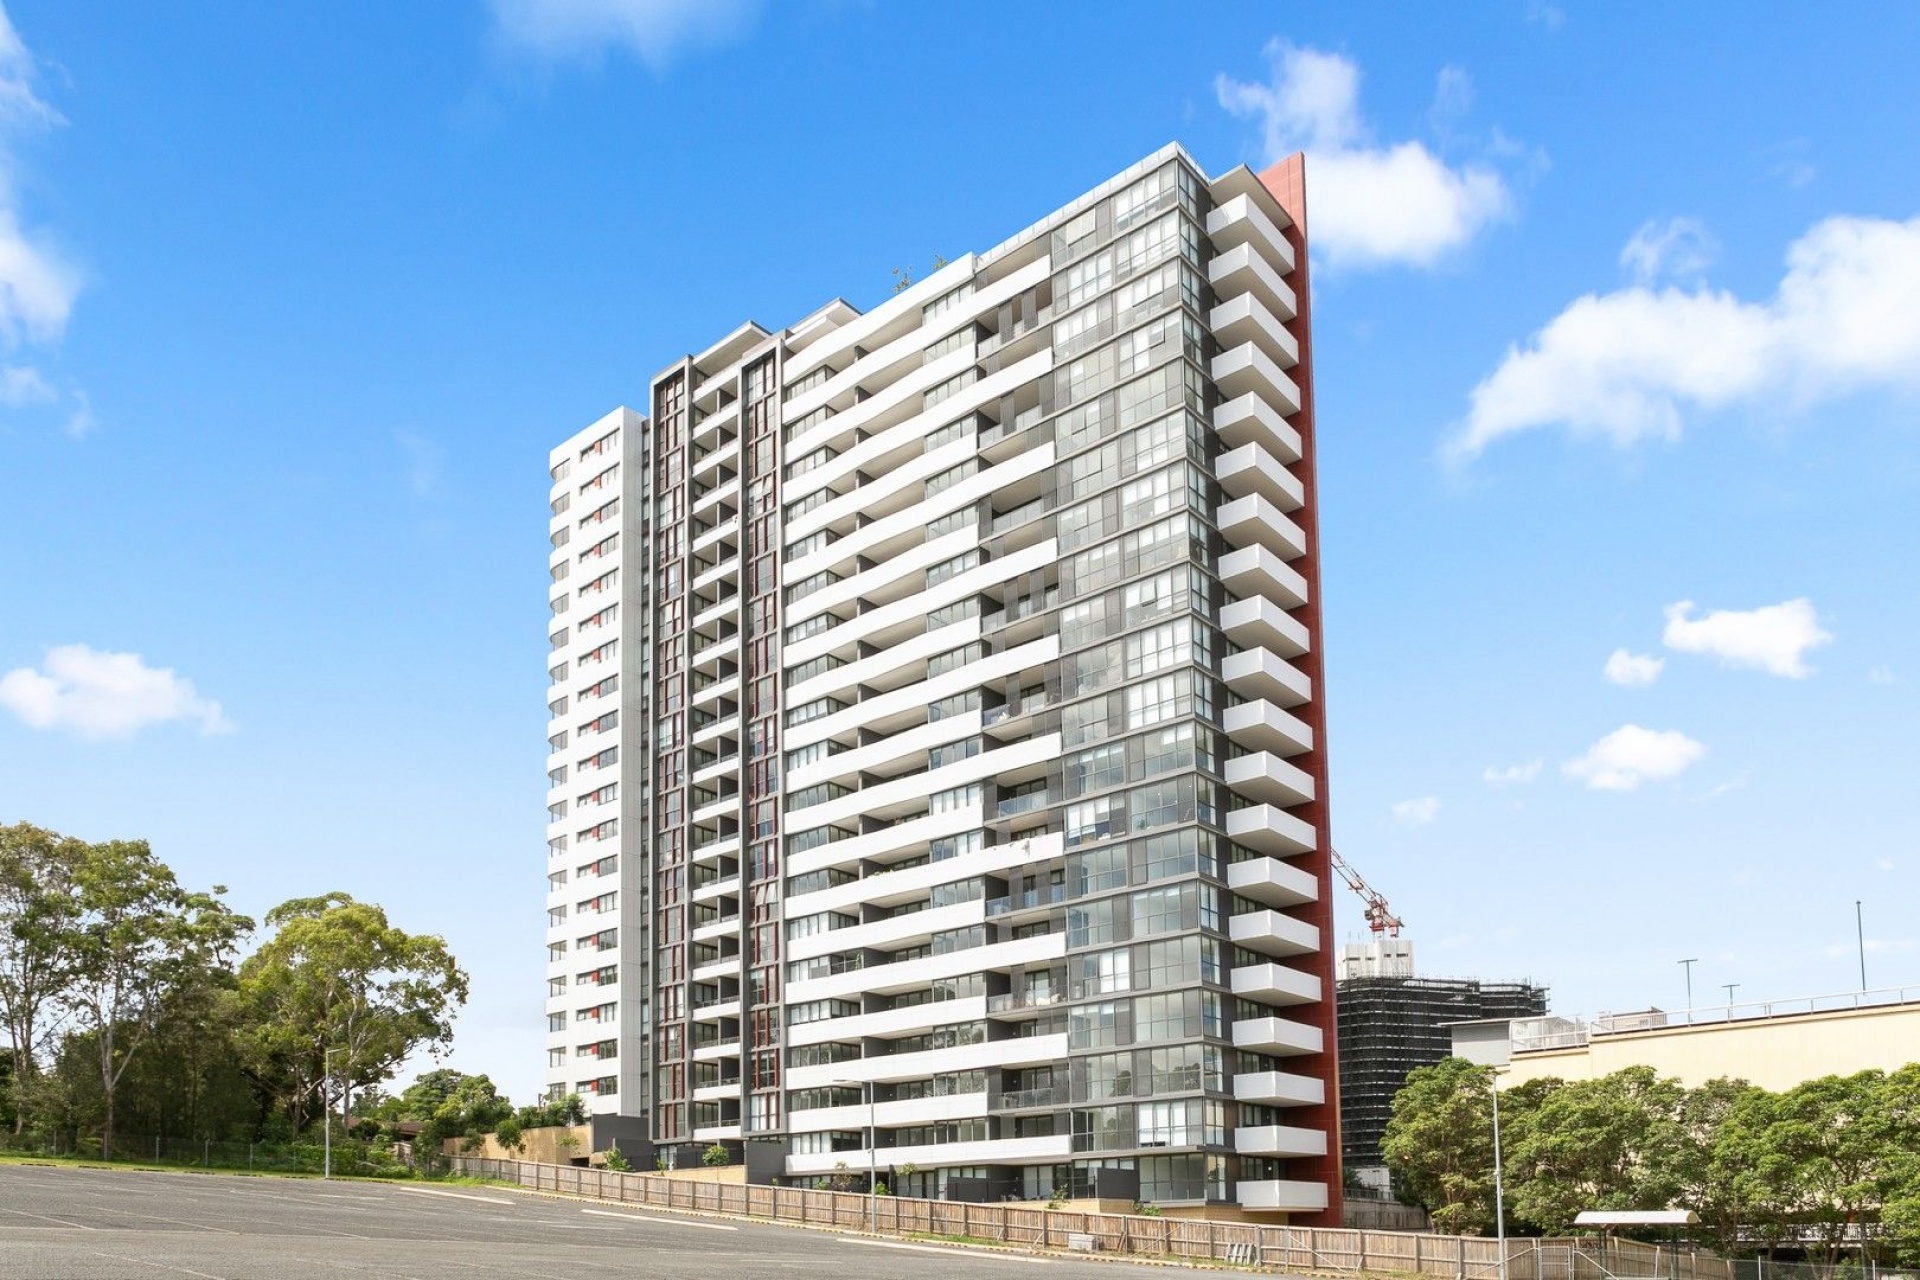 2 Bedrooms, Apartment, For Rent, Gay Street, Fifth Floor, 2 Bathrooms, Listing ID 1597, Castle Hill, NSW, Australia, 2154,